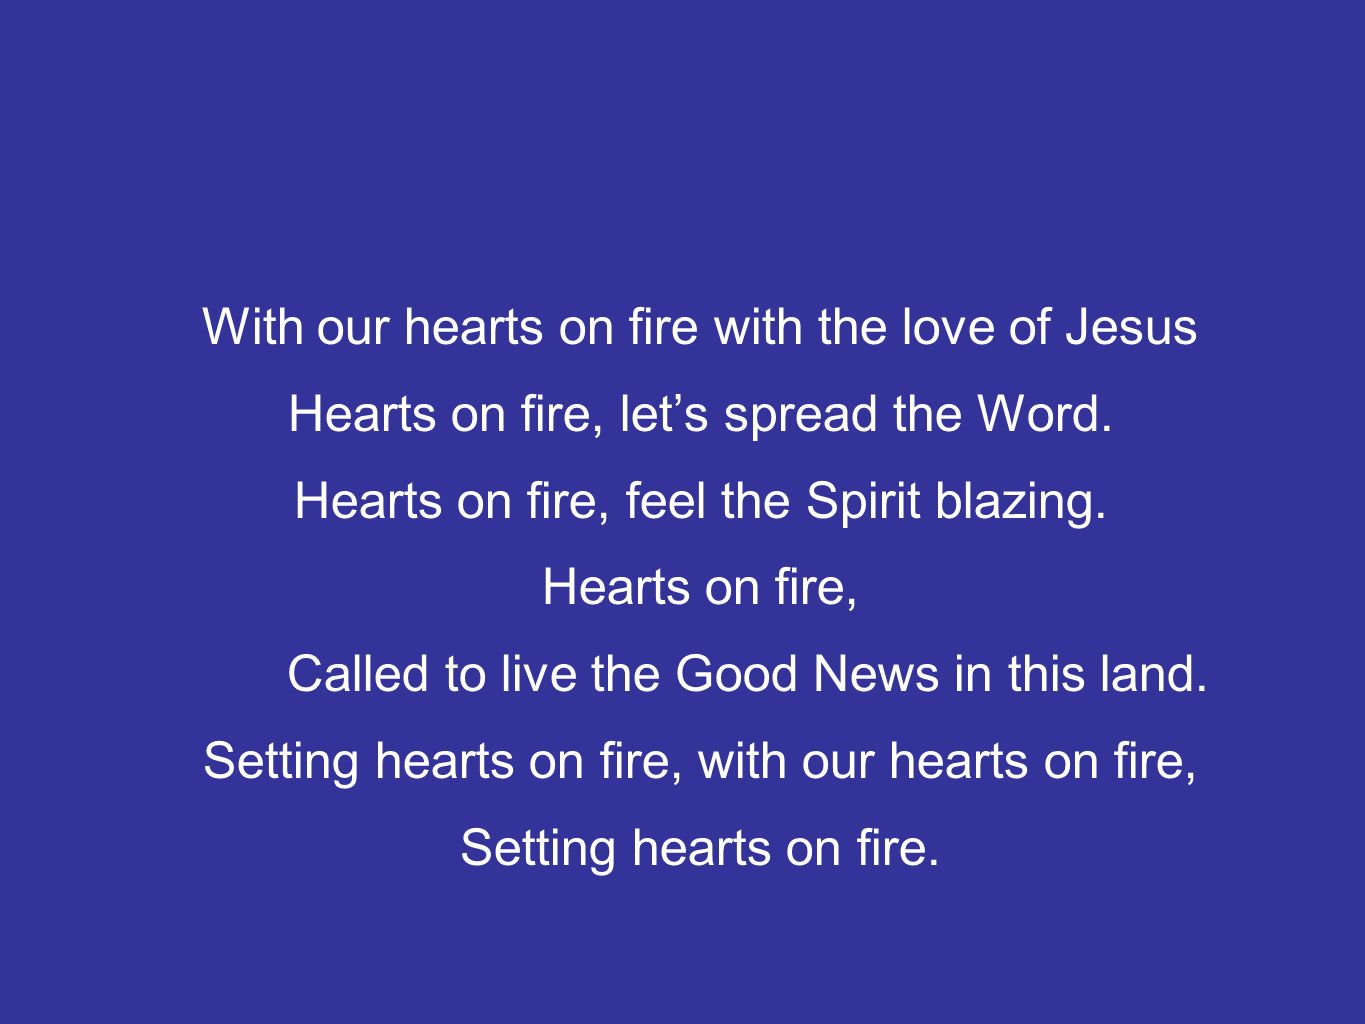 With our hearts on fire with the love of Jesus Hearts on fire, let’s spread the Word.